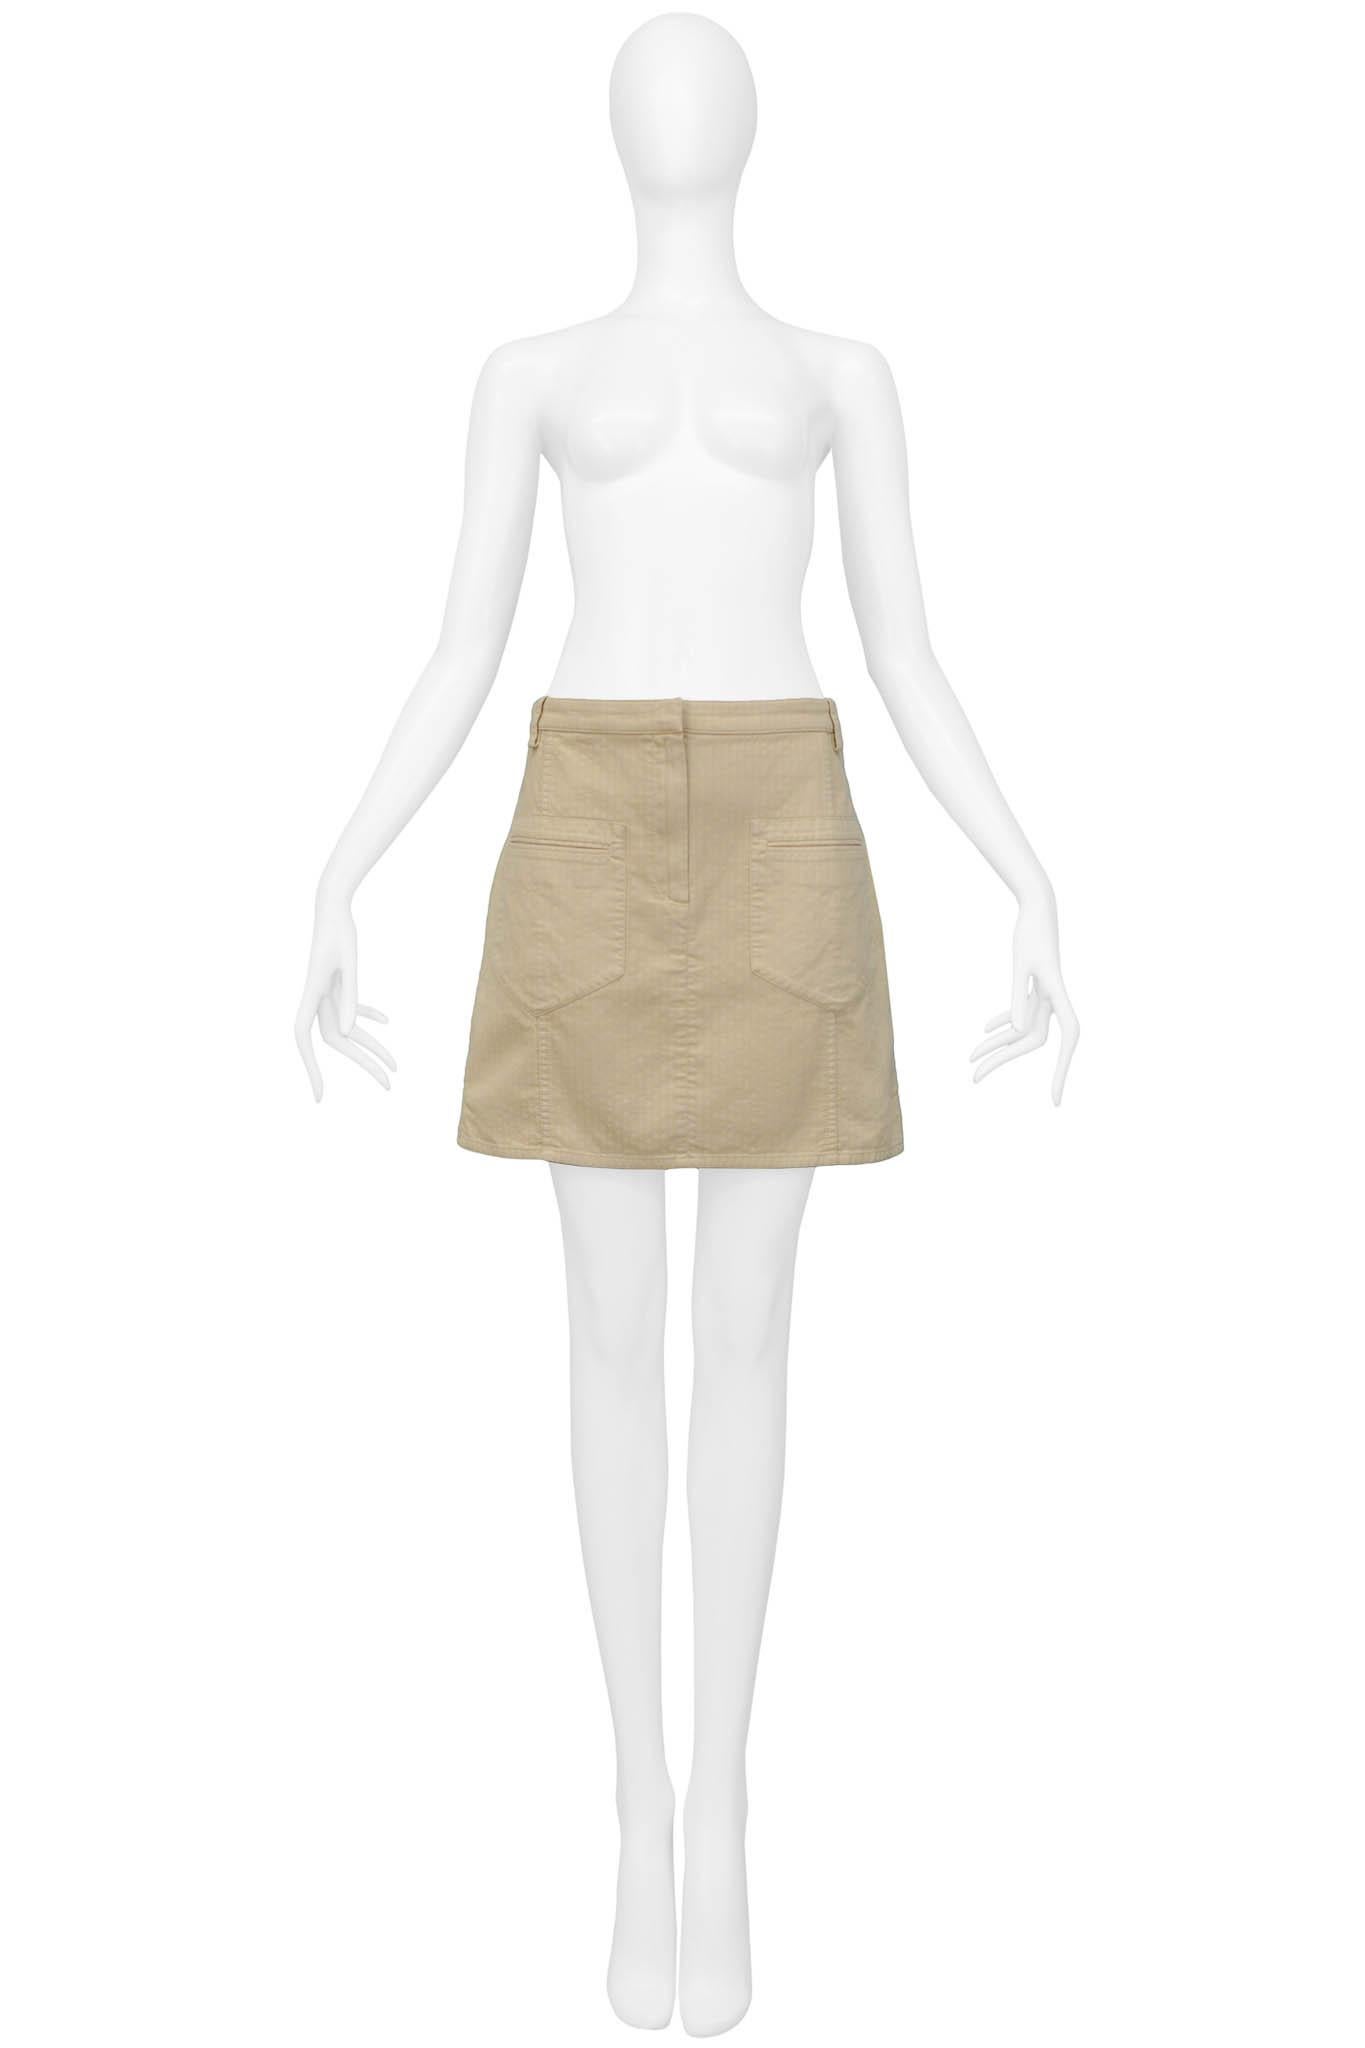 Resurrection Vintage is excited to a vintage Balenciaga khaki skirt featuring front patch pockets, back pockets, puckered fabric, and belt loops. 

Balenciaga Paris
Size 40 
100% Cotton
Excellent Vintage Condition
Authenticity Guaranteed